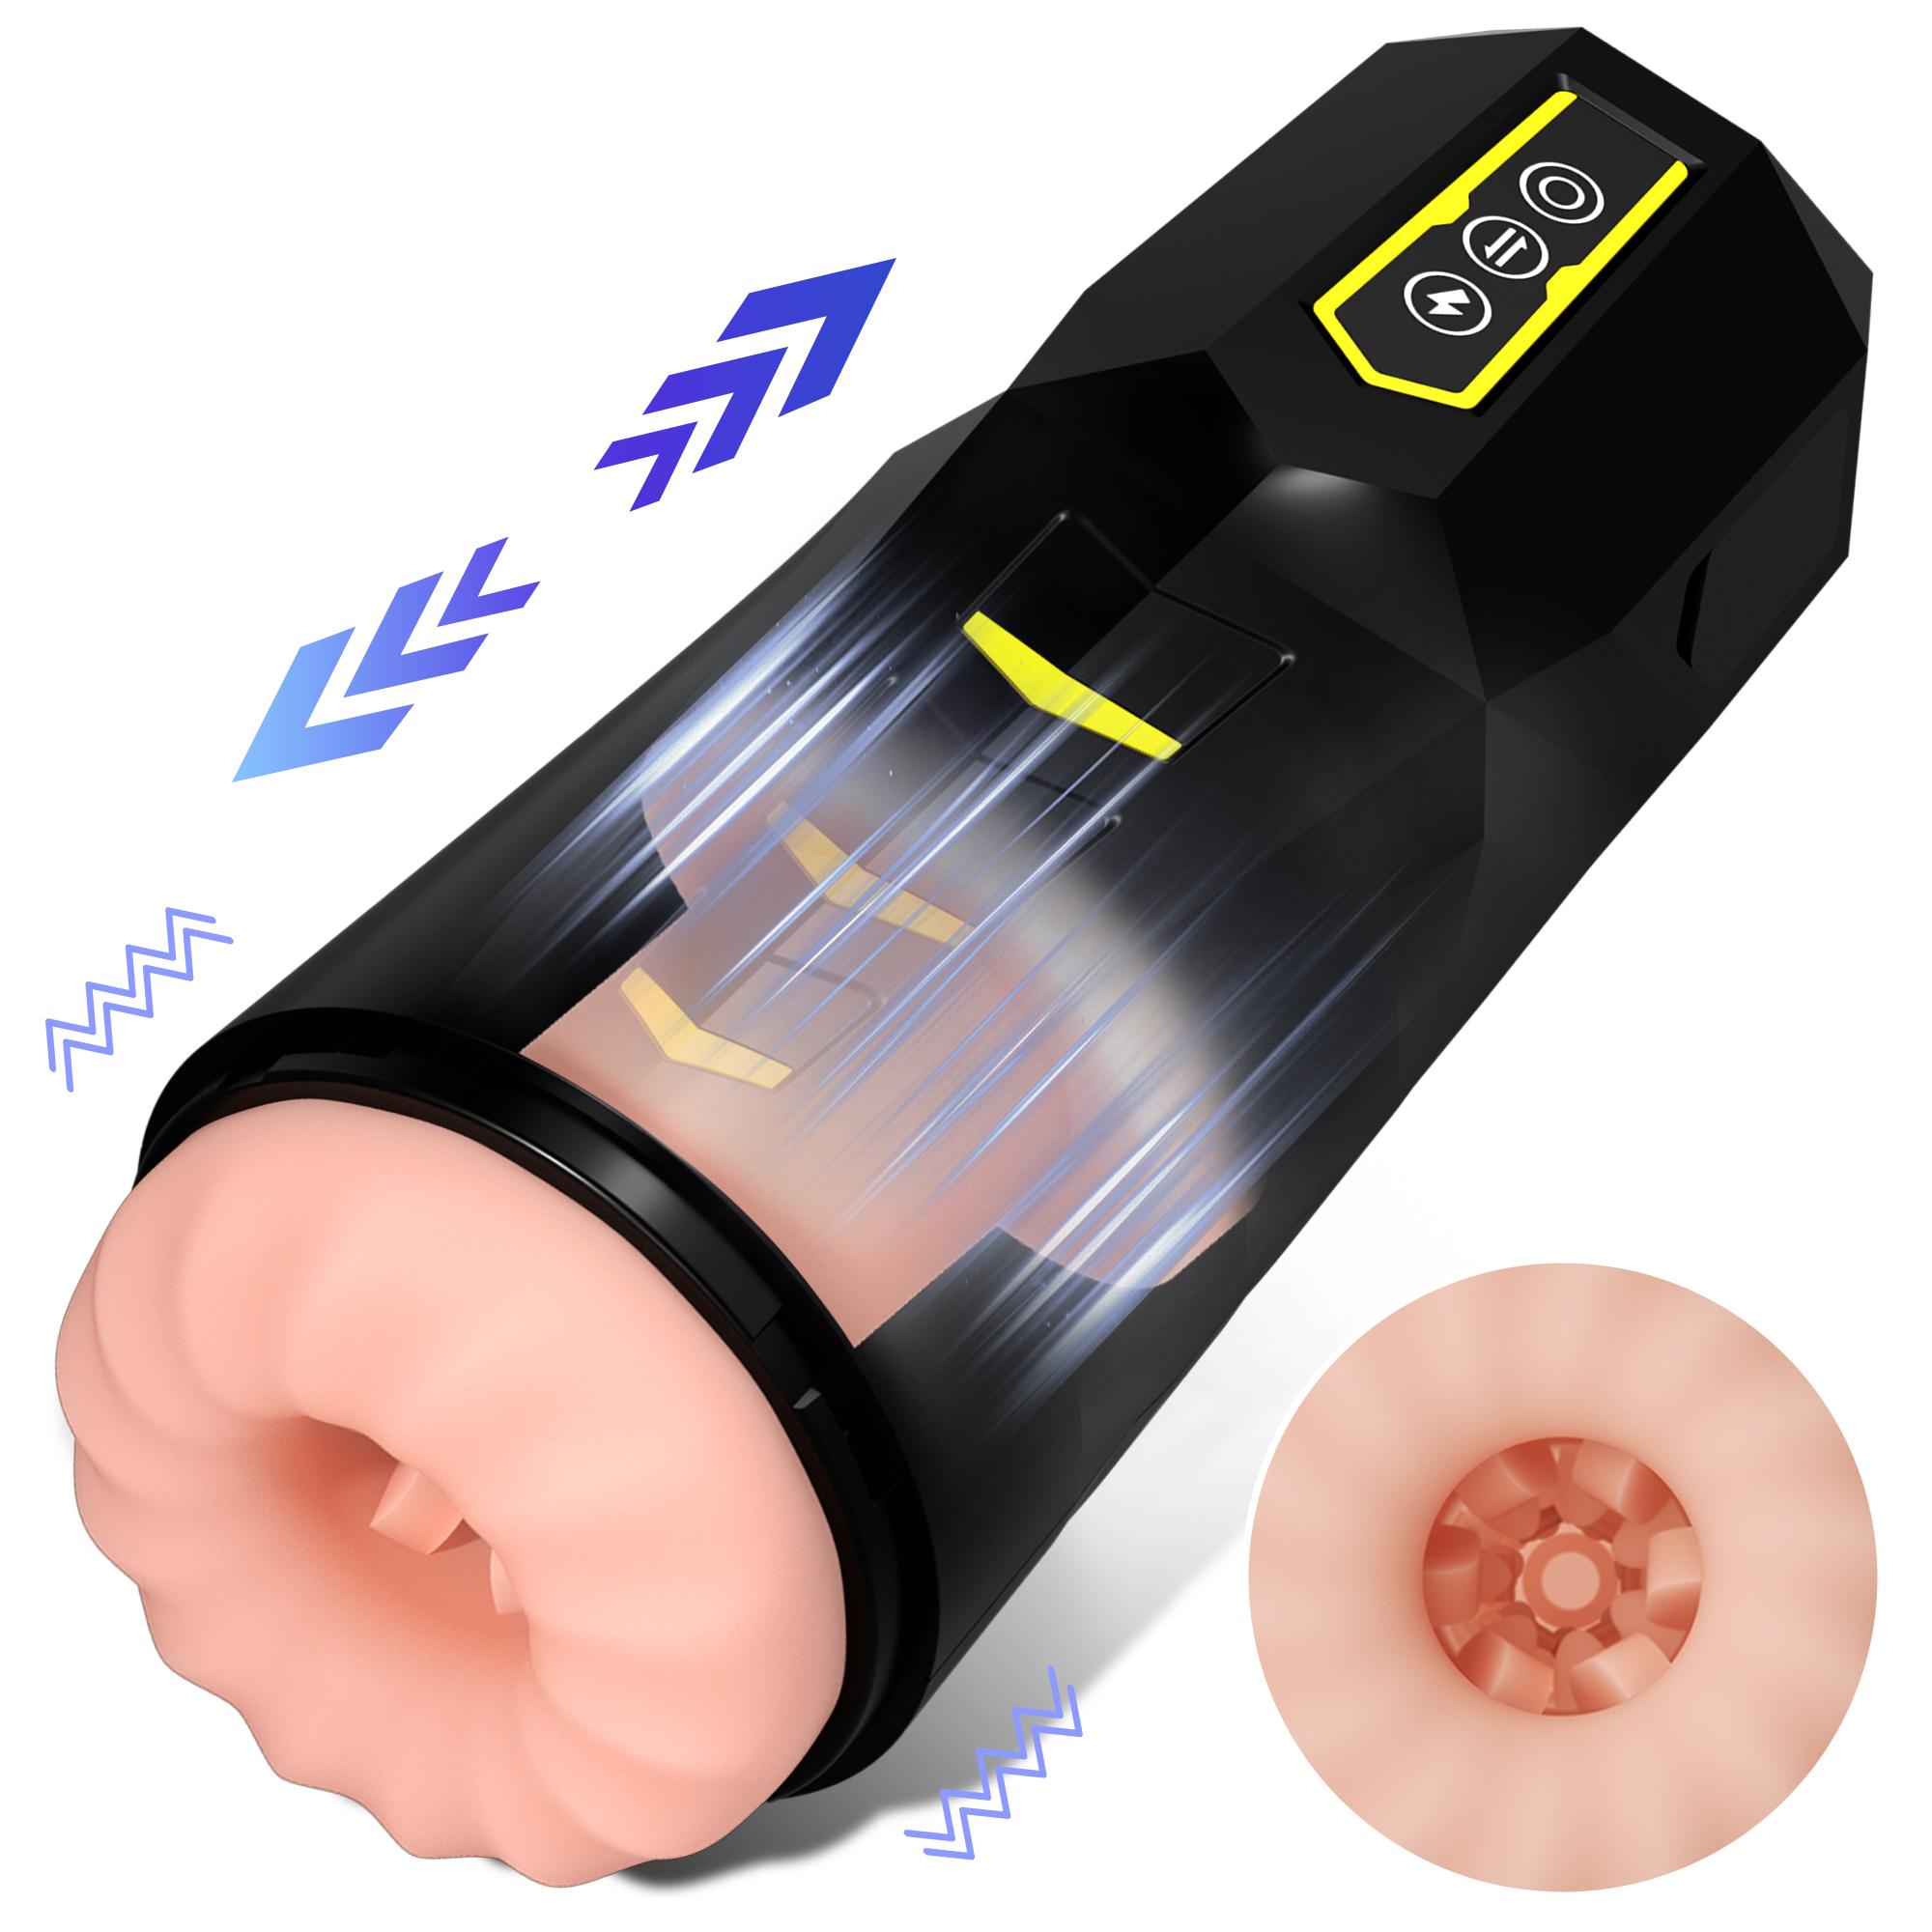 9 Vibrating And Thrusting One Click Storm Mode Hands Free Masturbation Cup Massager For Men